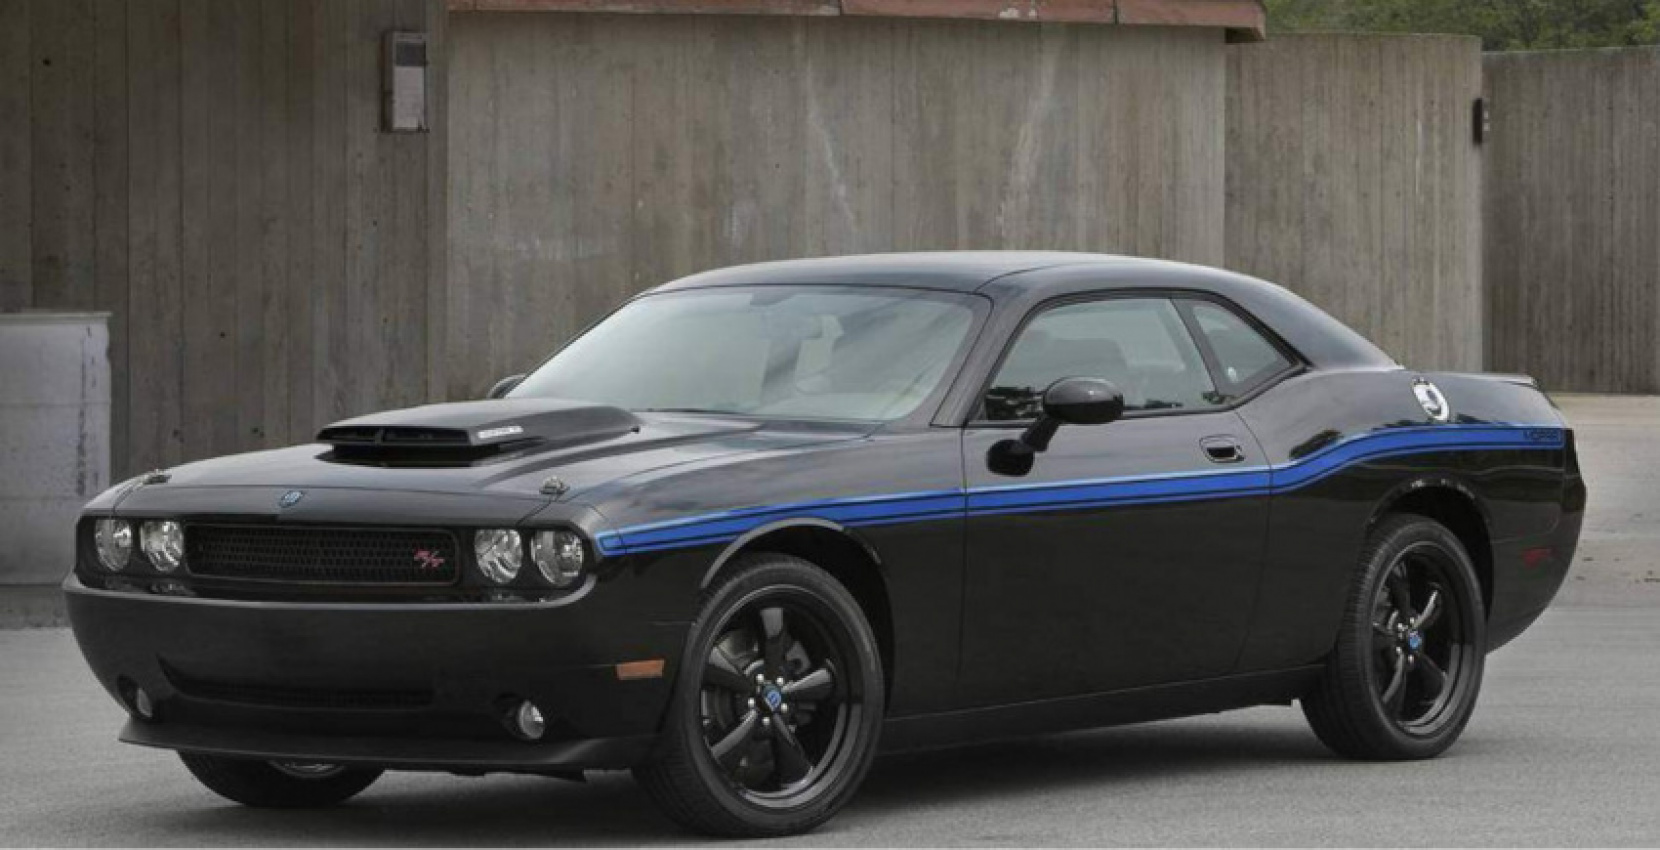 autos, cars, classic cars, dodge, 3rd generation challenger guides, vnex, 2010 dodge challenger guide: specs, performance & more